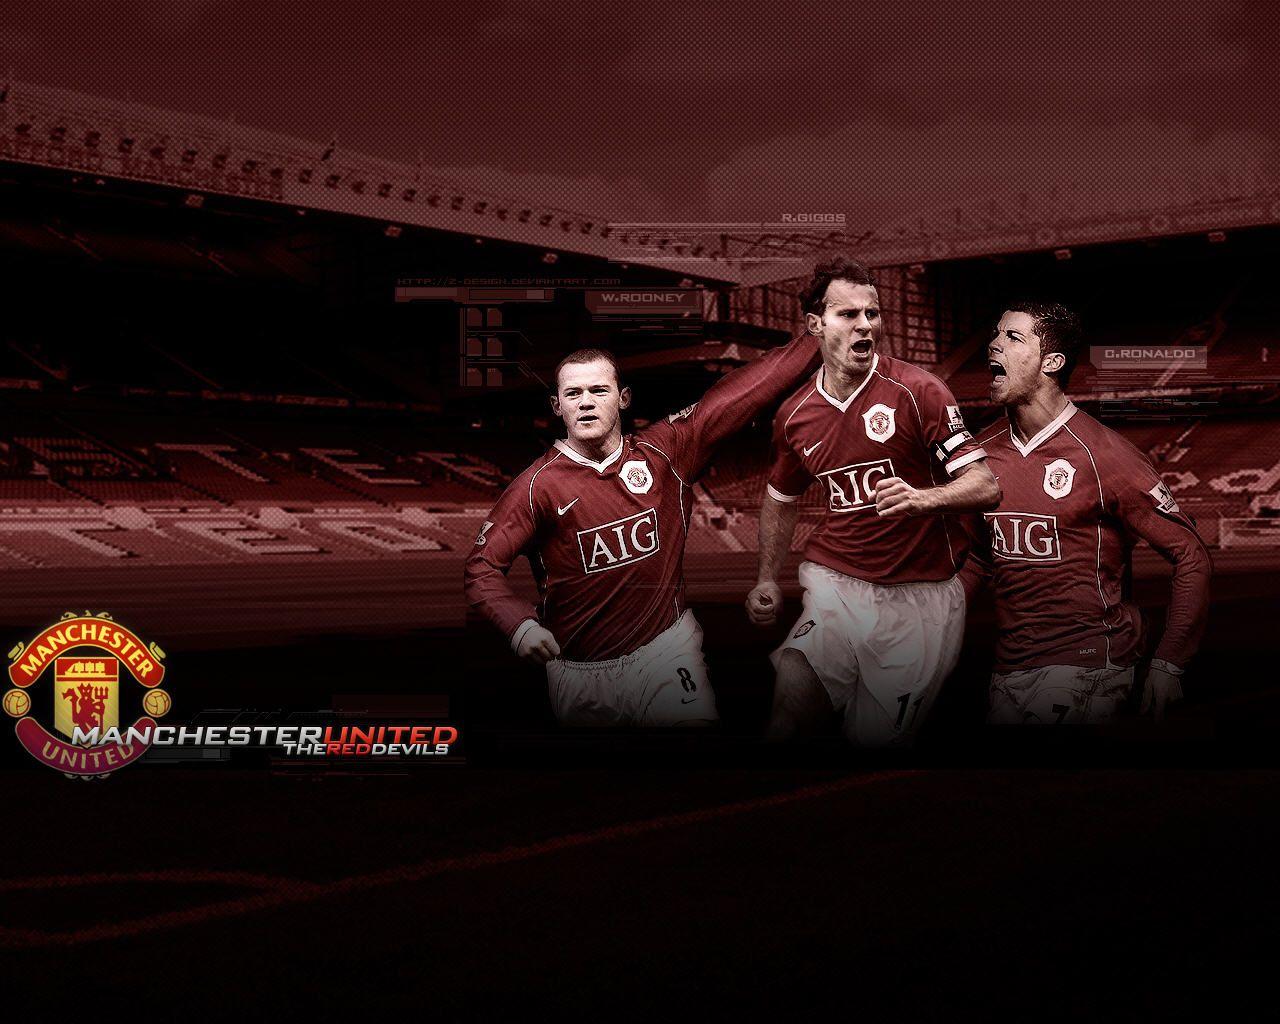 Manchester United Team wallpaper, Football Picture and Photo